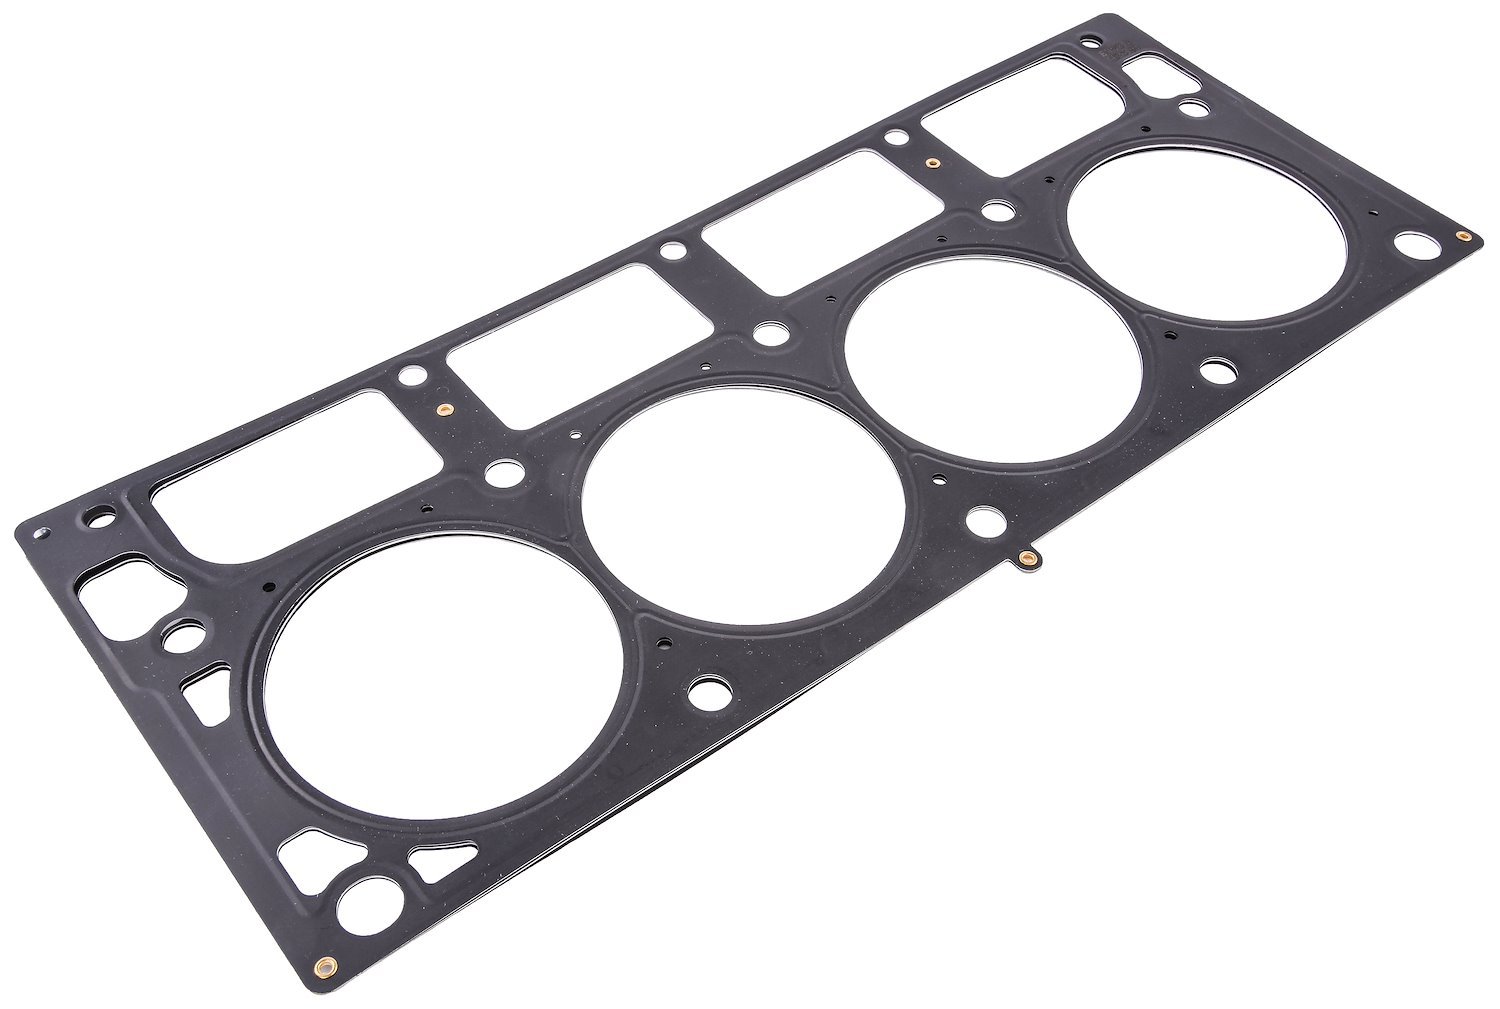 GM Cylinder Head Gasket for GM LSA, LS9 and Supercharged LS3, L92 6.2L Engines